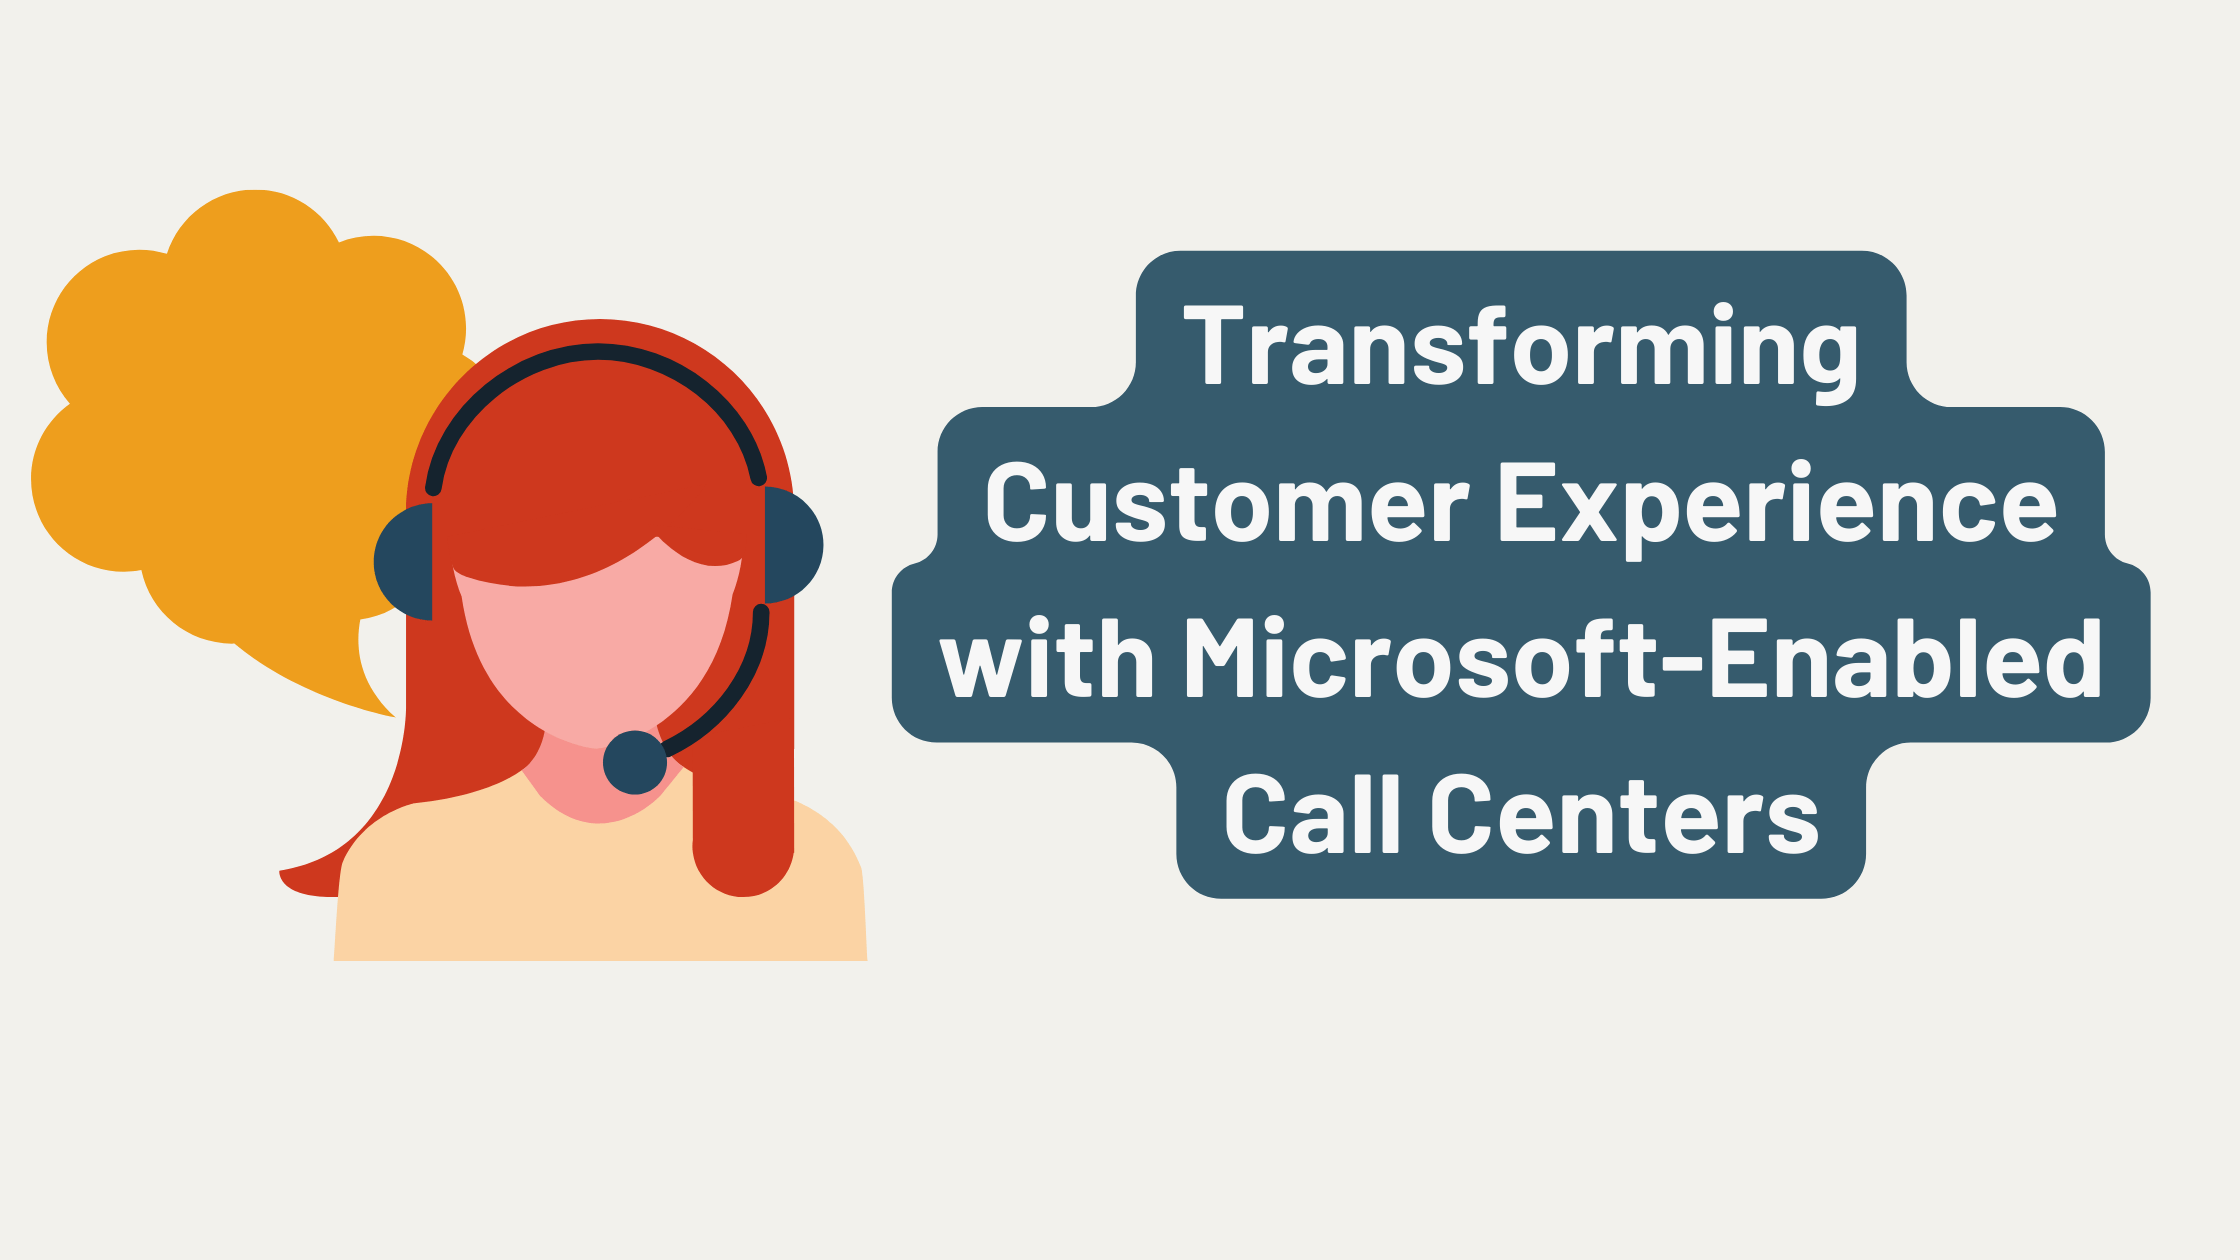 Transforming Customer Experience with Microsoft-Enabled Call Centers